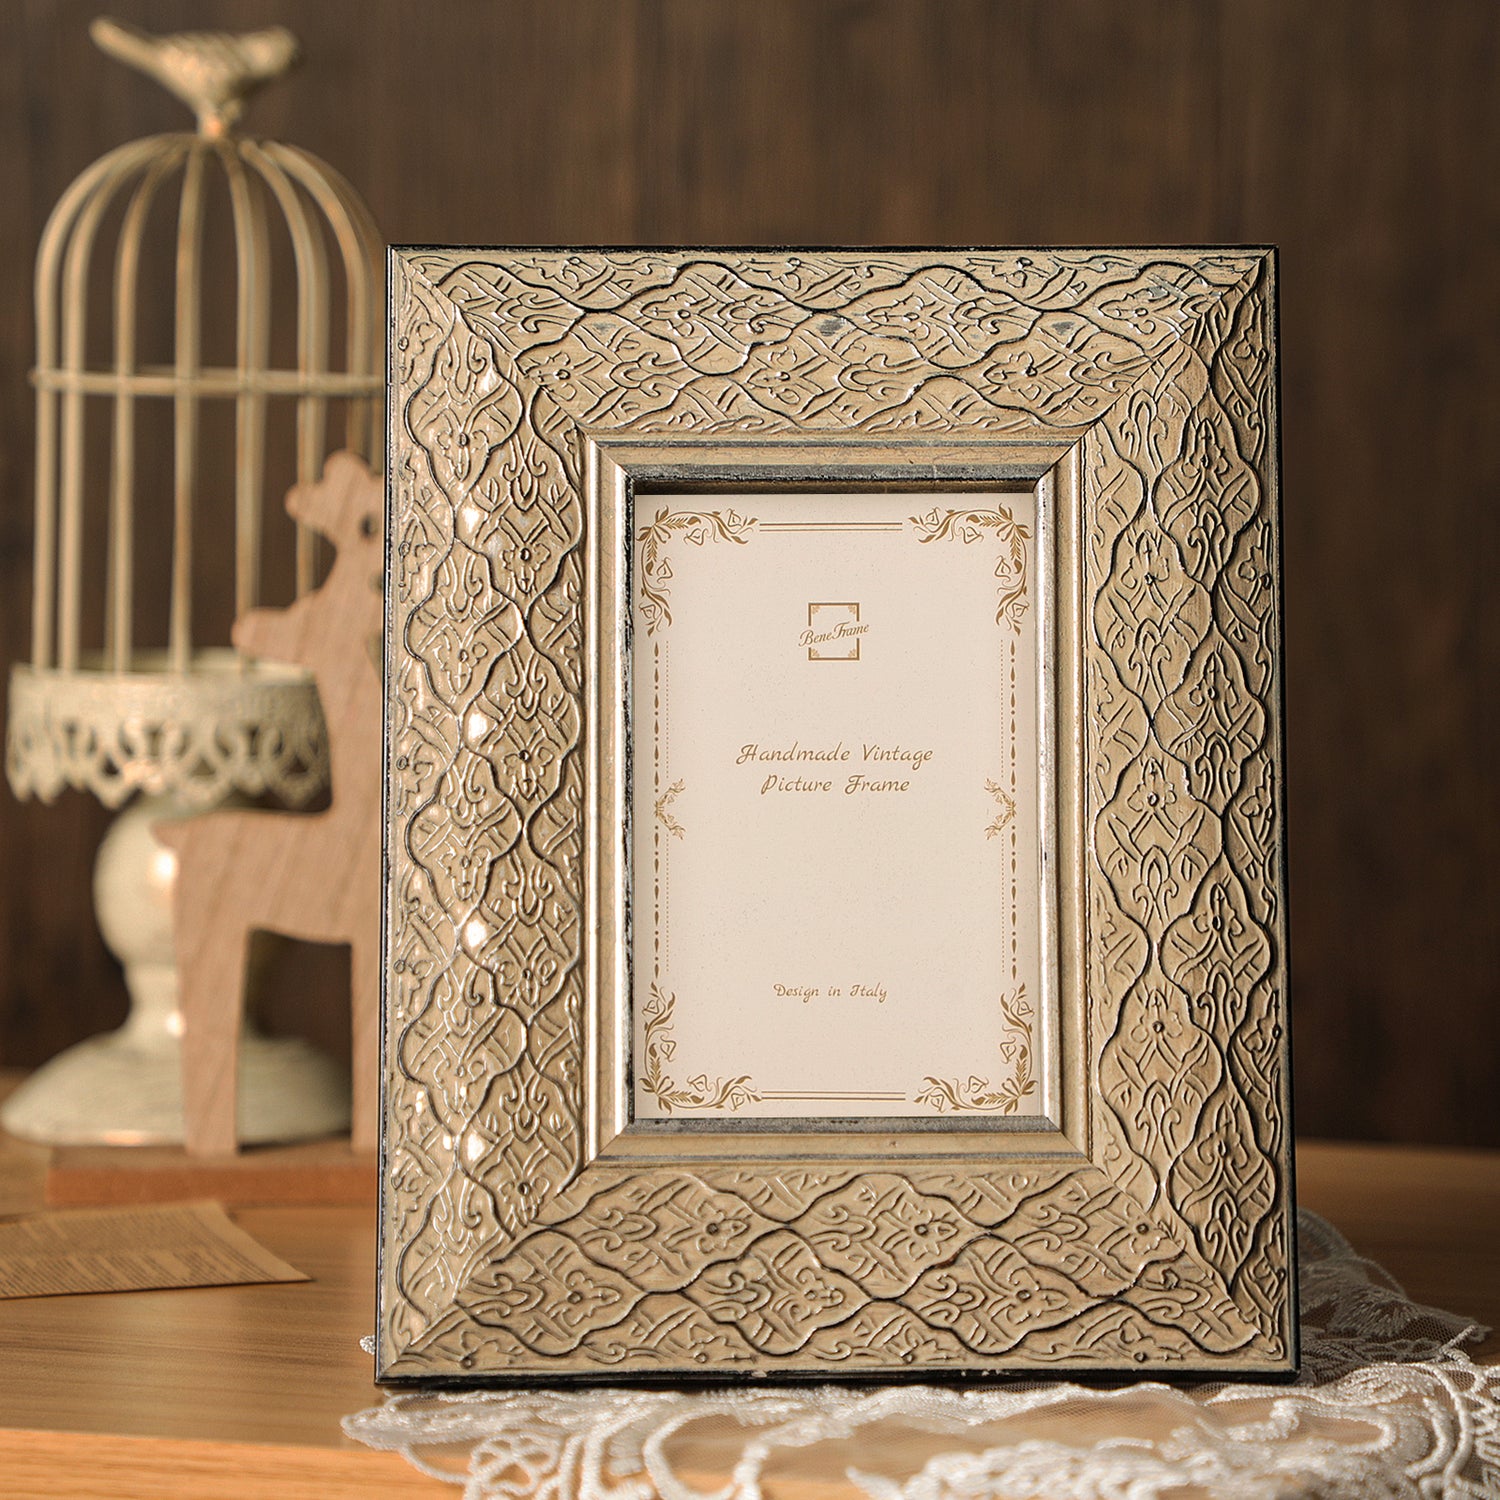 BeneFrame-Picture Frame-CLA17-Scenery2